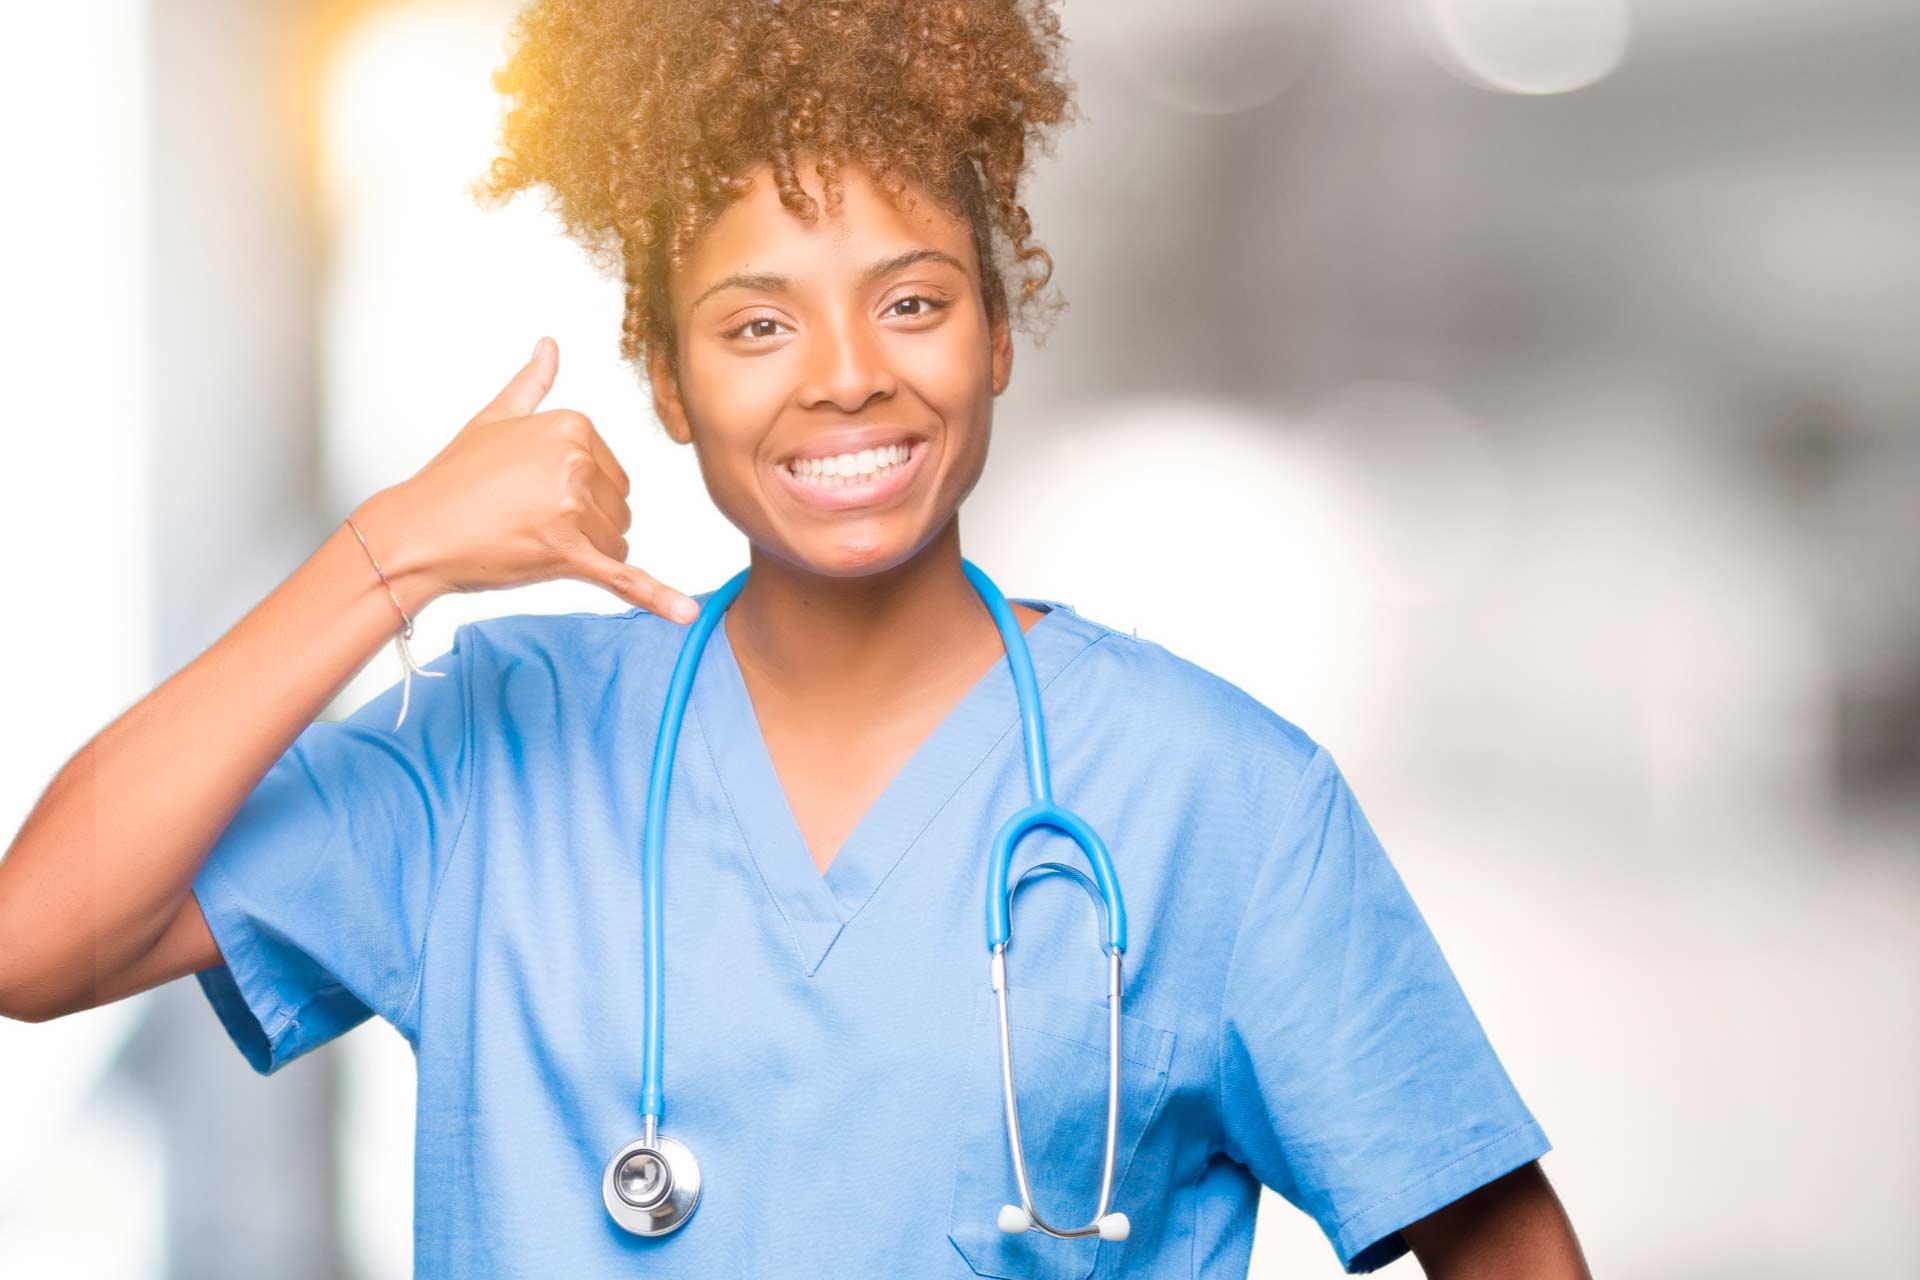 Smiling African-American nurse in blue scrubs making a phone symbol with her hand, reminding readers that the Leaf411 hotline welcomes your calls.